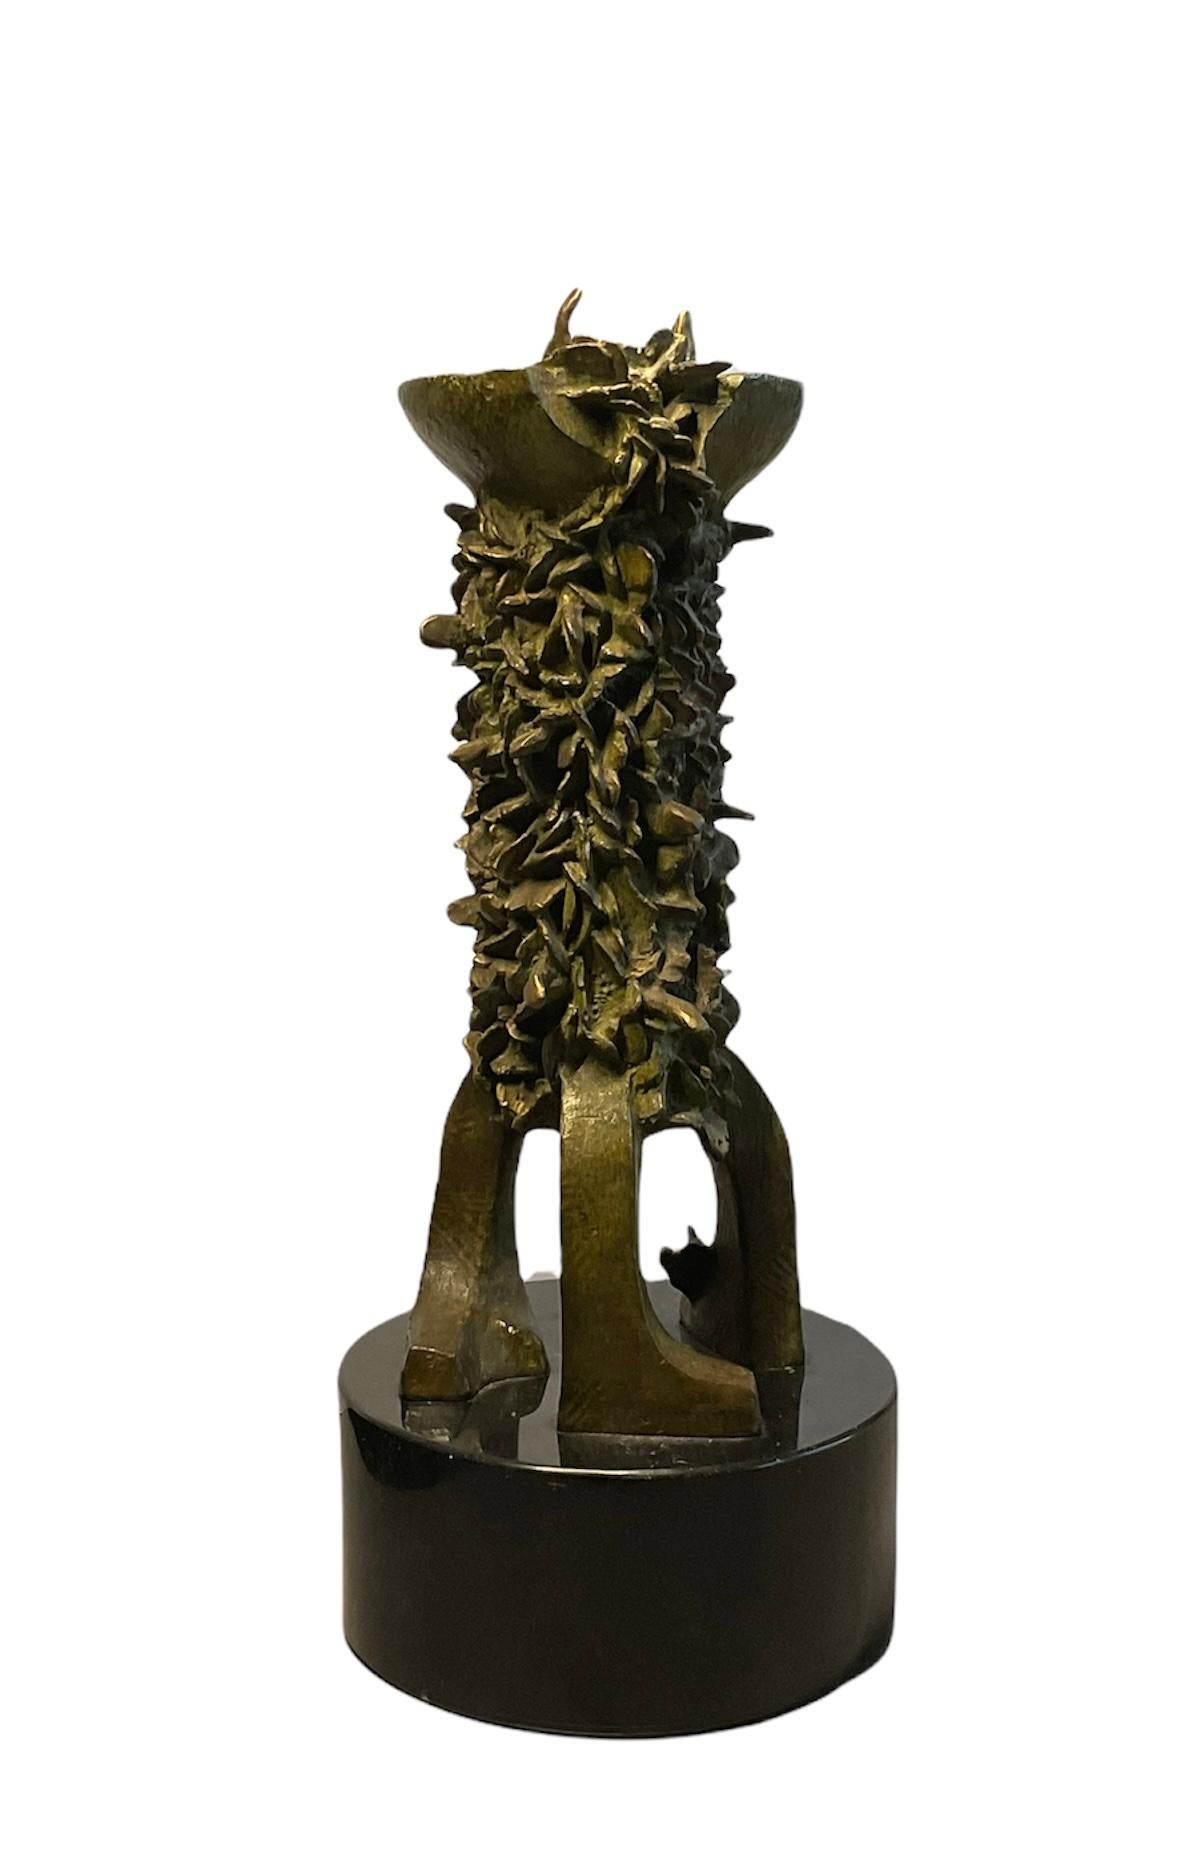 American Bronze Sculpture “Structure Of A Butterfly Nursery” by Melquíades R. Sastre